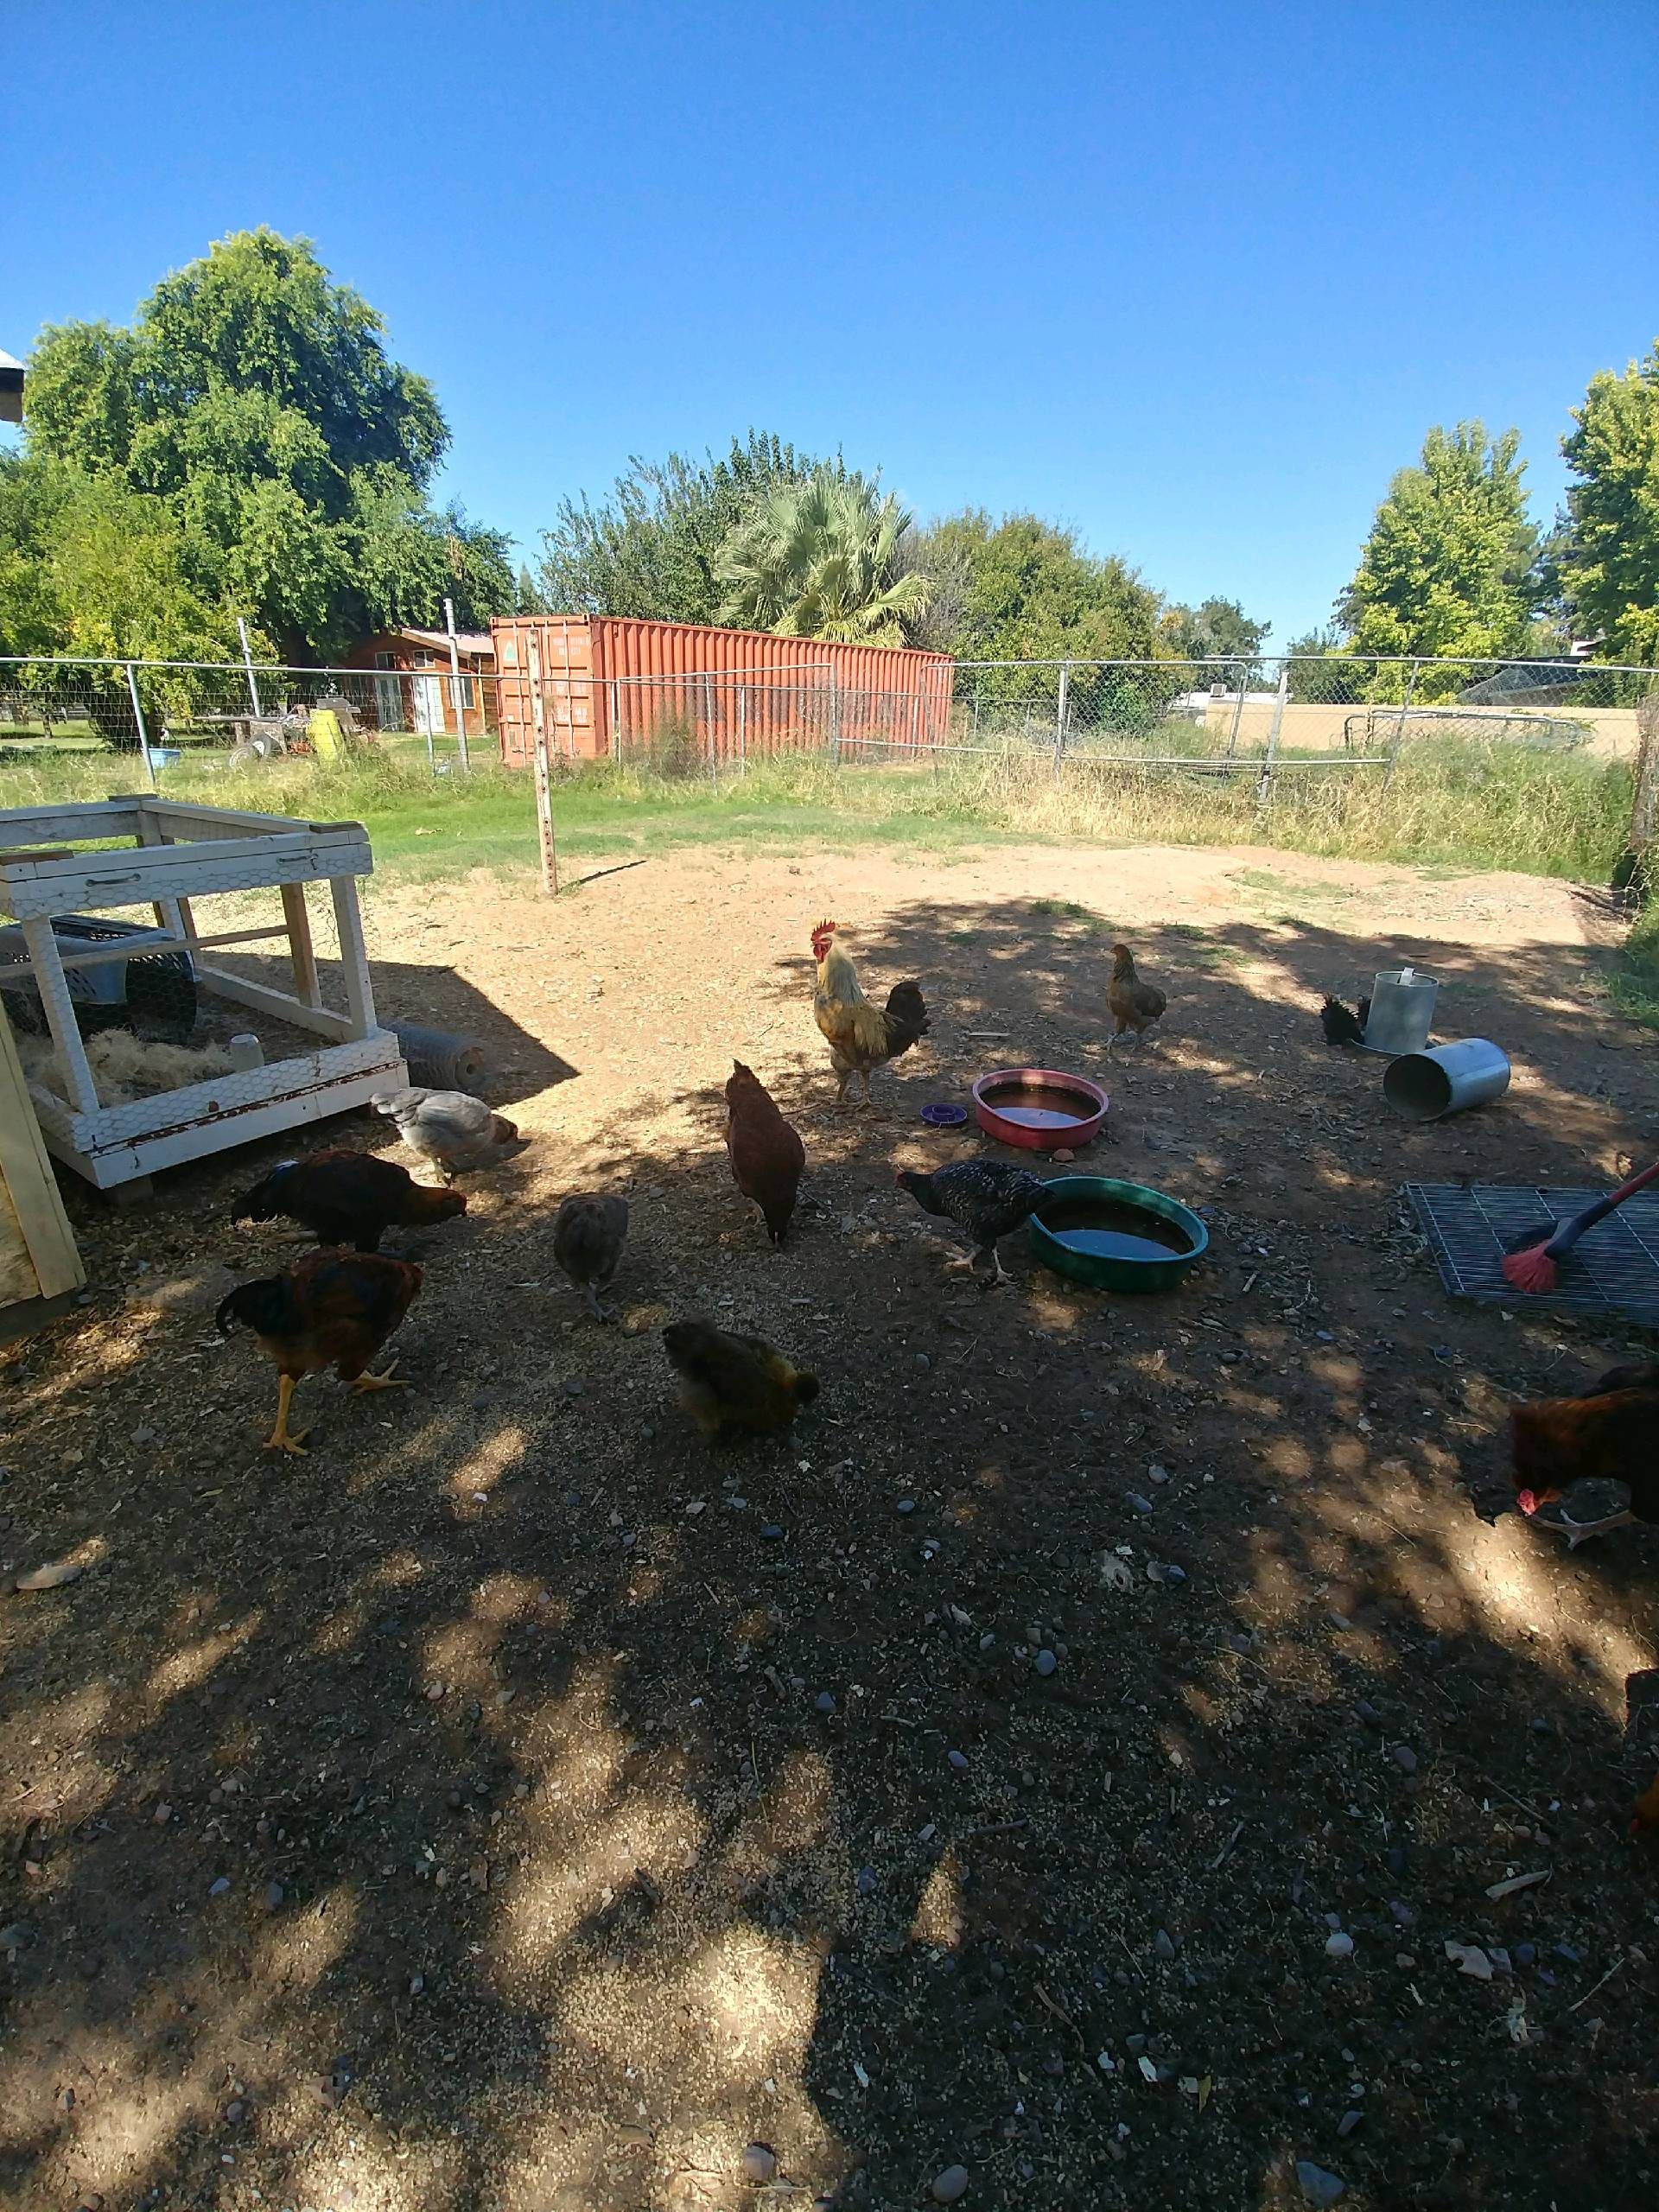 Young Roosters